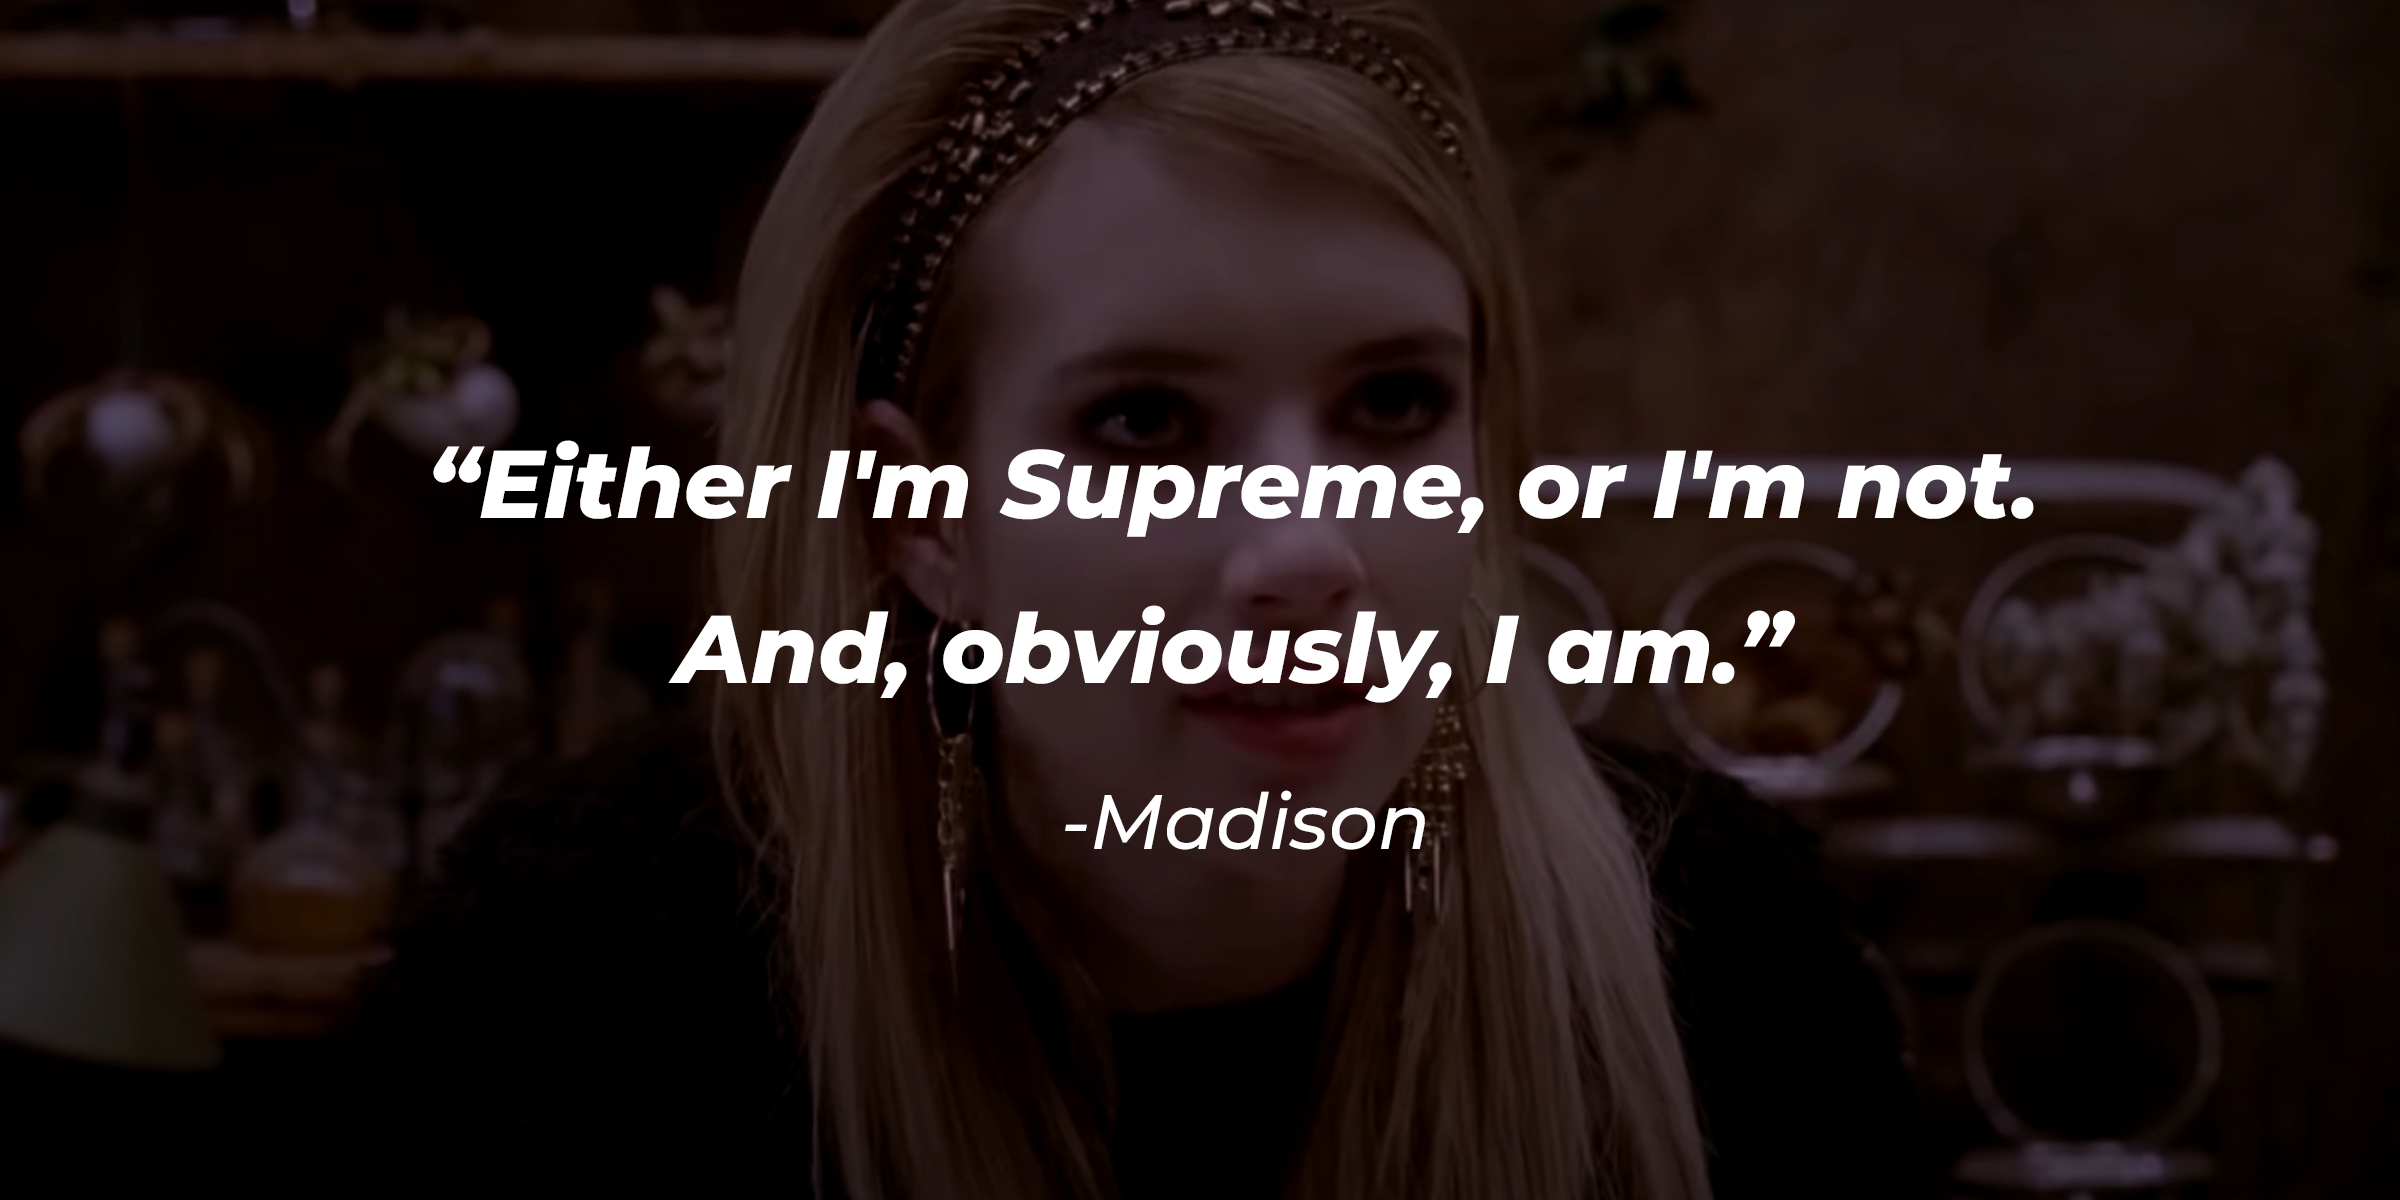 Madison, with her quote: "Either I'm Supreme, or I'm not. And, obviously, I am." | Source: youtube.com/FXNetworks